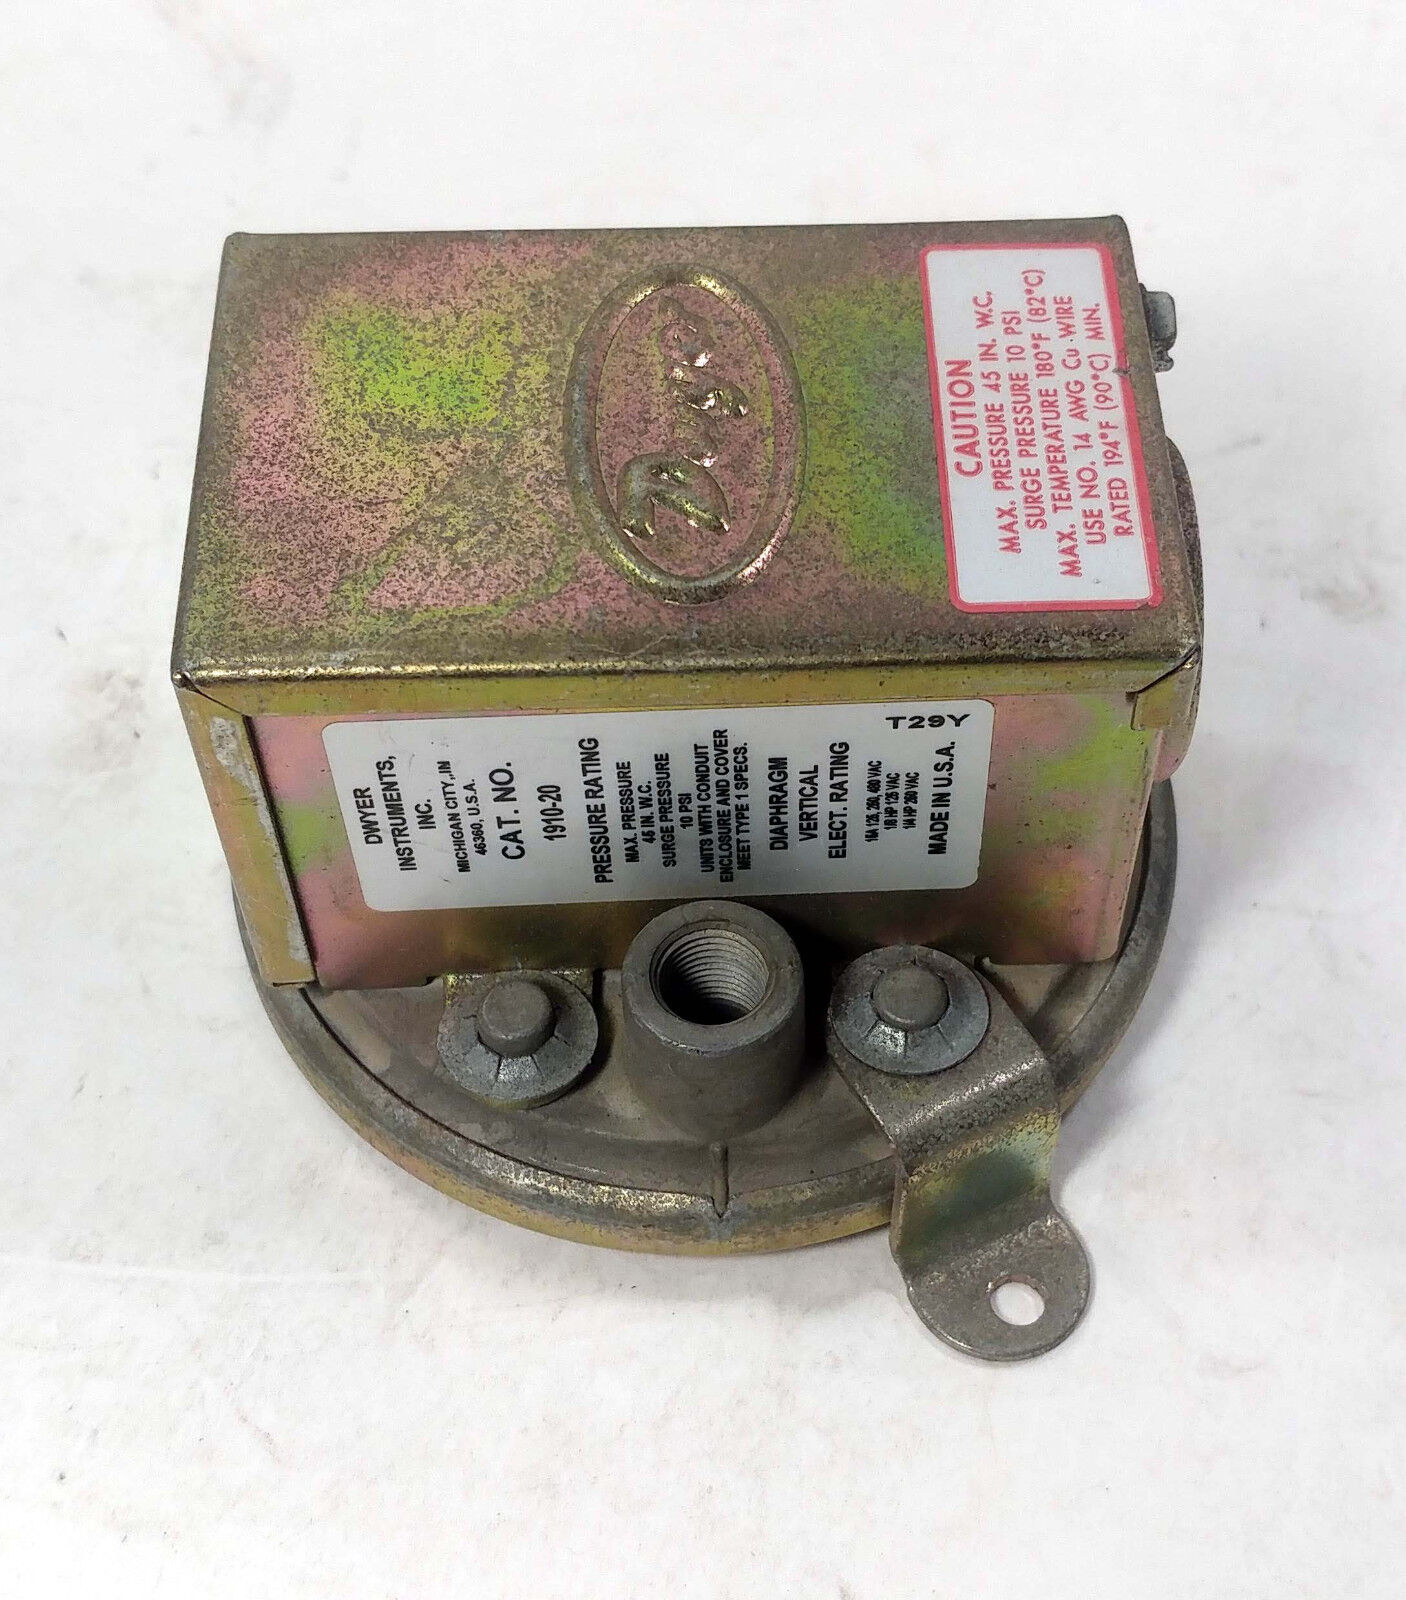 1 USED DWYER 1910-20 PRESSURE SWITCH ***MAKE OFFER***